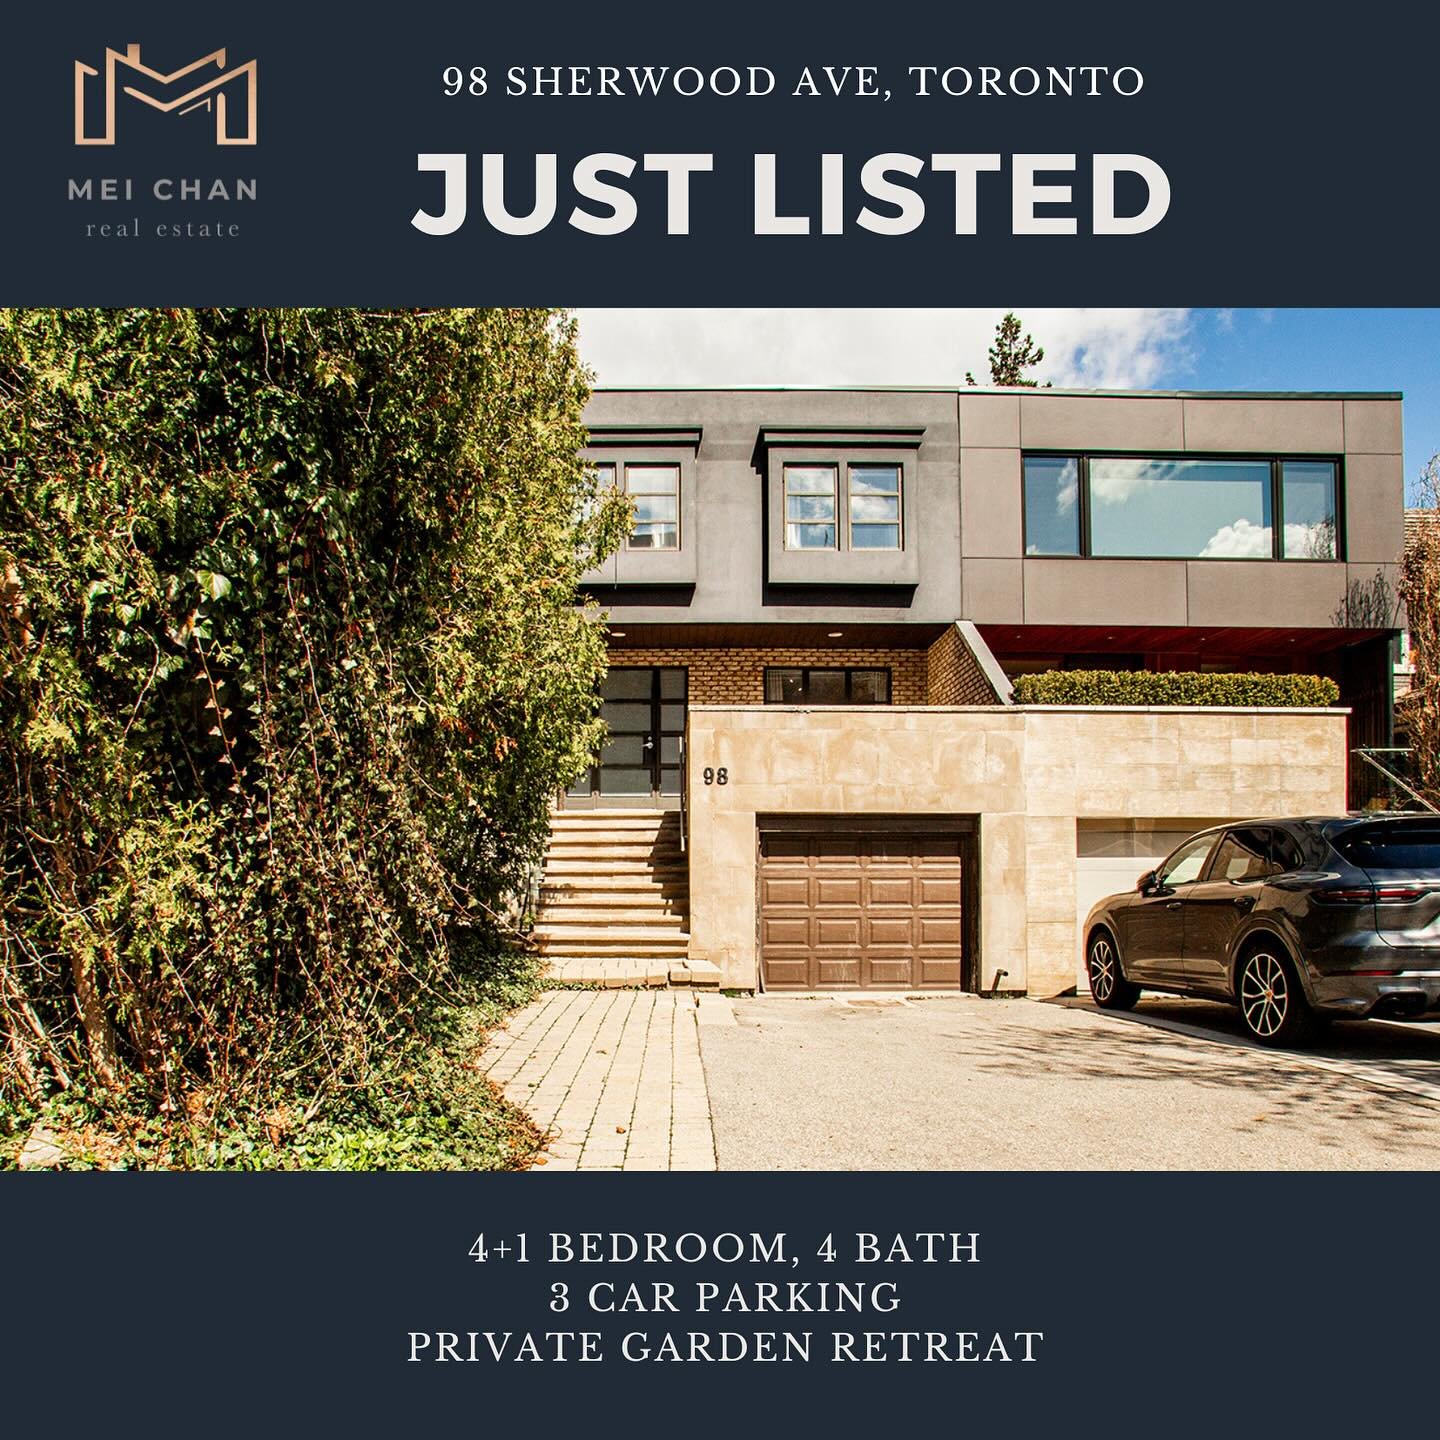 Stunningly Spacious Contemporary Family Home In Sought After Area w/Top Schools (Blythwood Jr. PS &amp; NTCI). 4+1 Spacious Bedrooms &amp; 4 Baths. Total Parking for 3 Cars w/1 Garage. Beautiful Open Concept Living/Dining Space. Finished Basment w/Wa